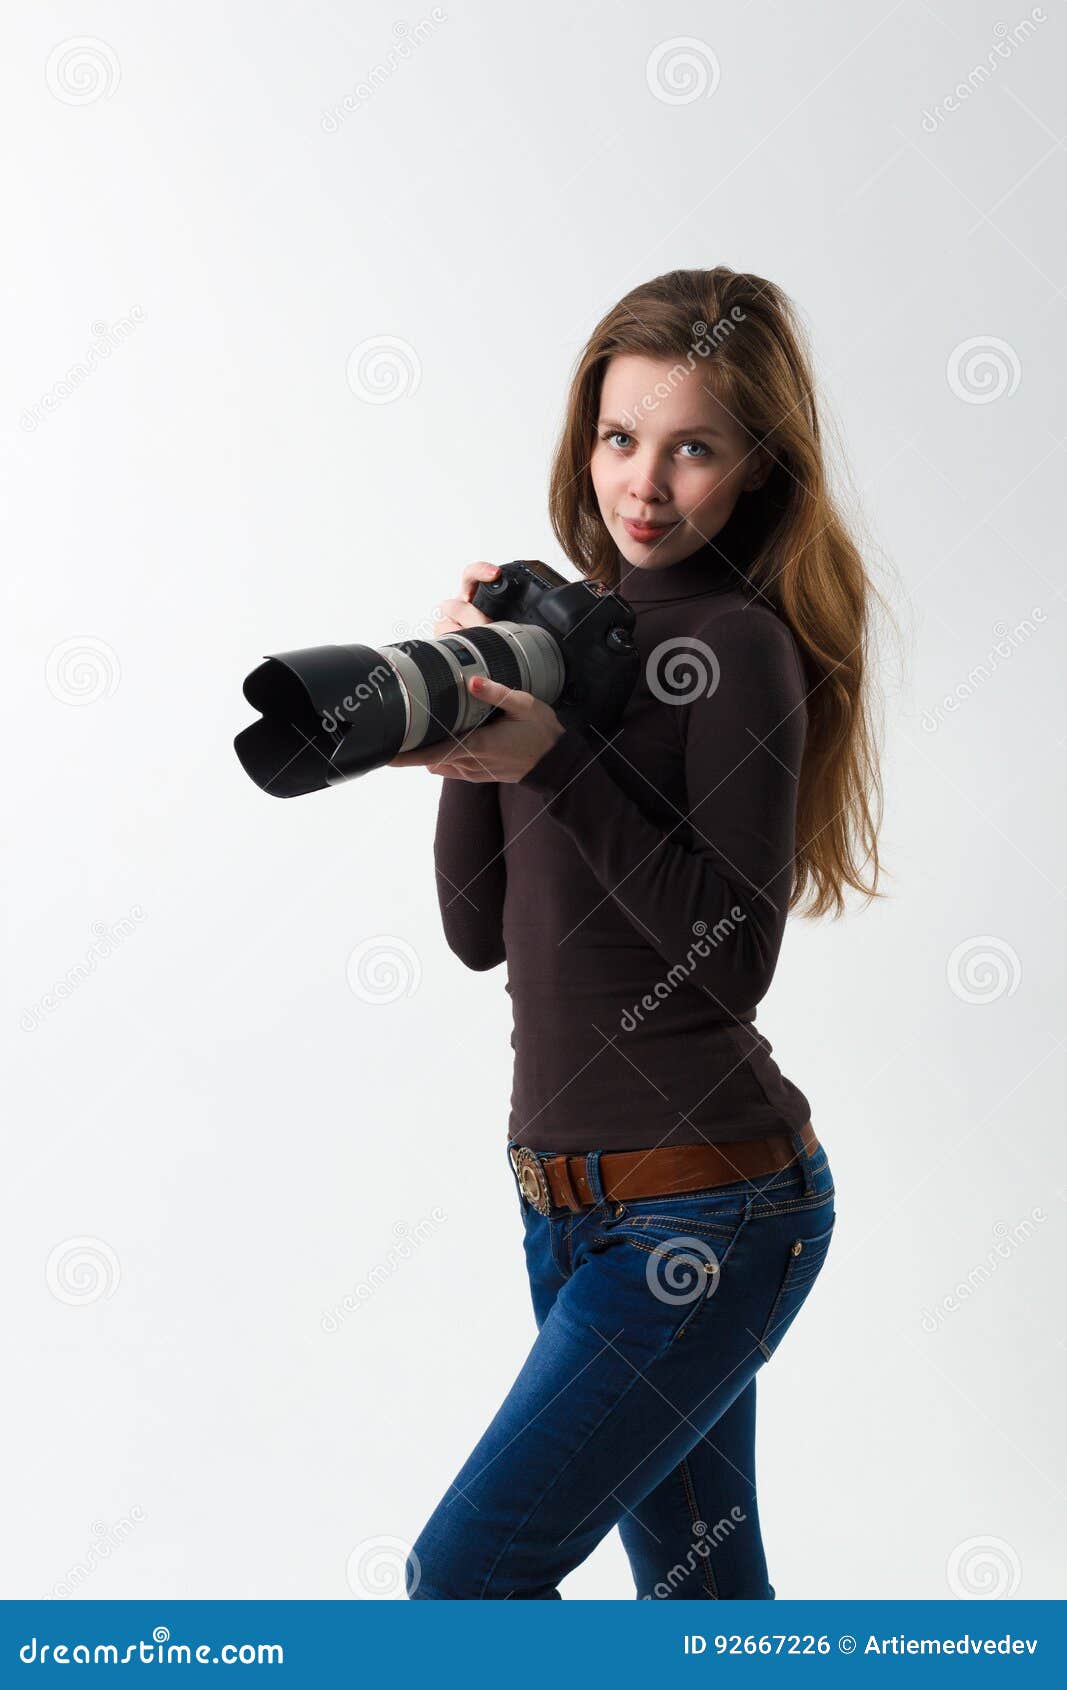 Man photographer with a DSLR camera in her hands posing - stock photo  3190149 | Crushpixel